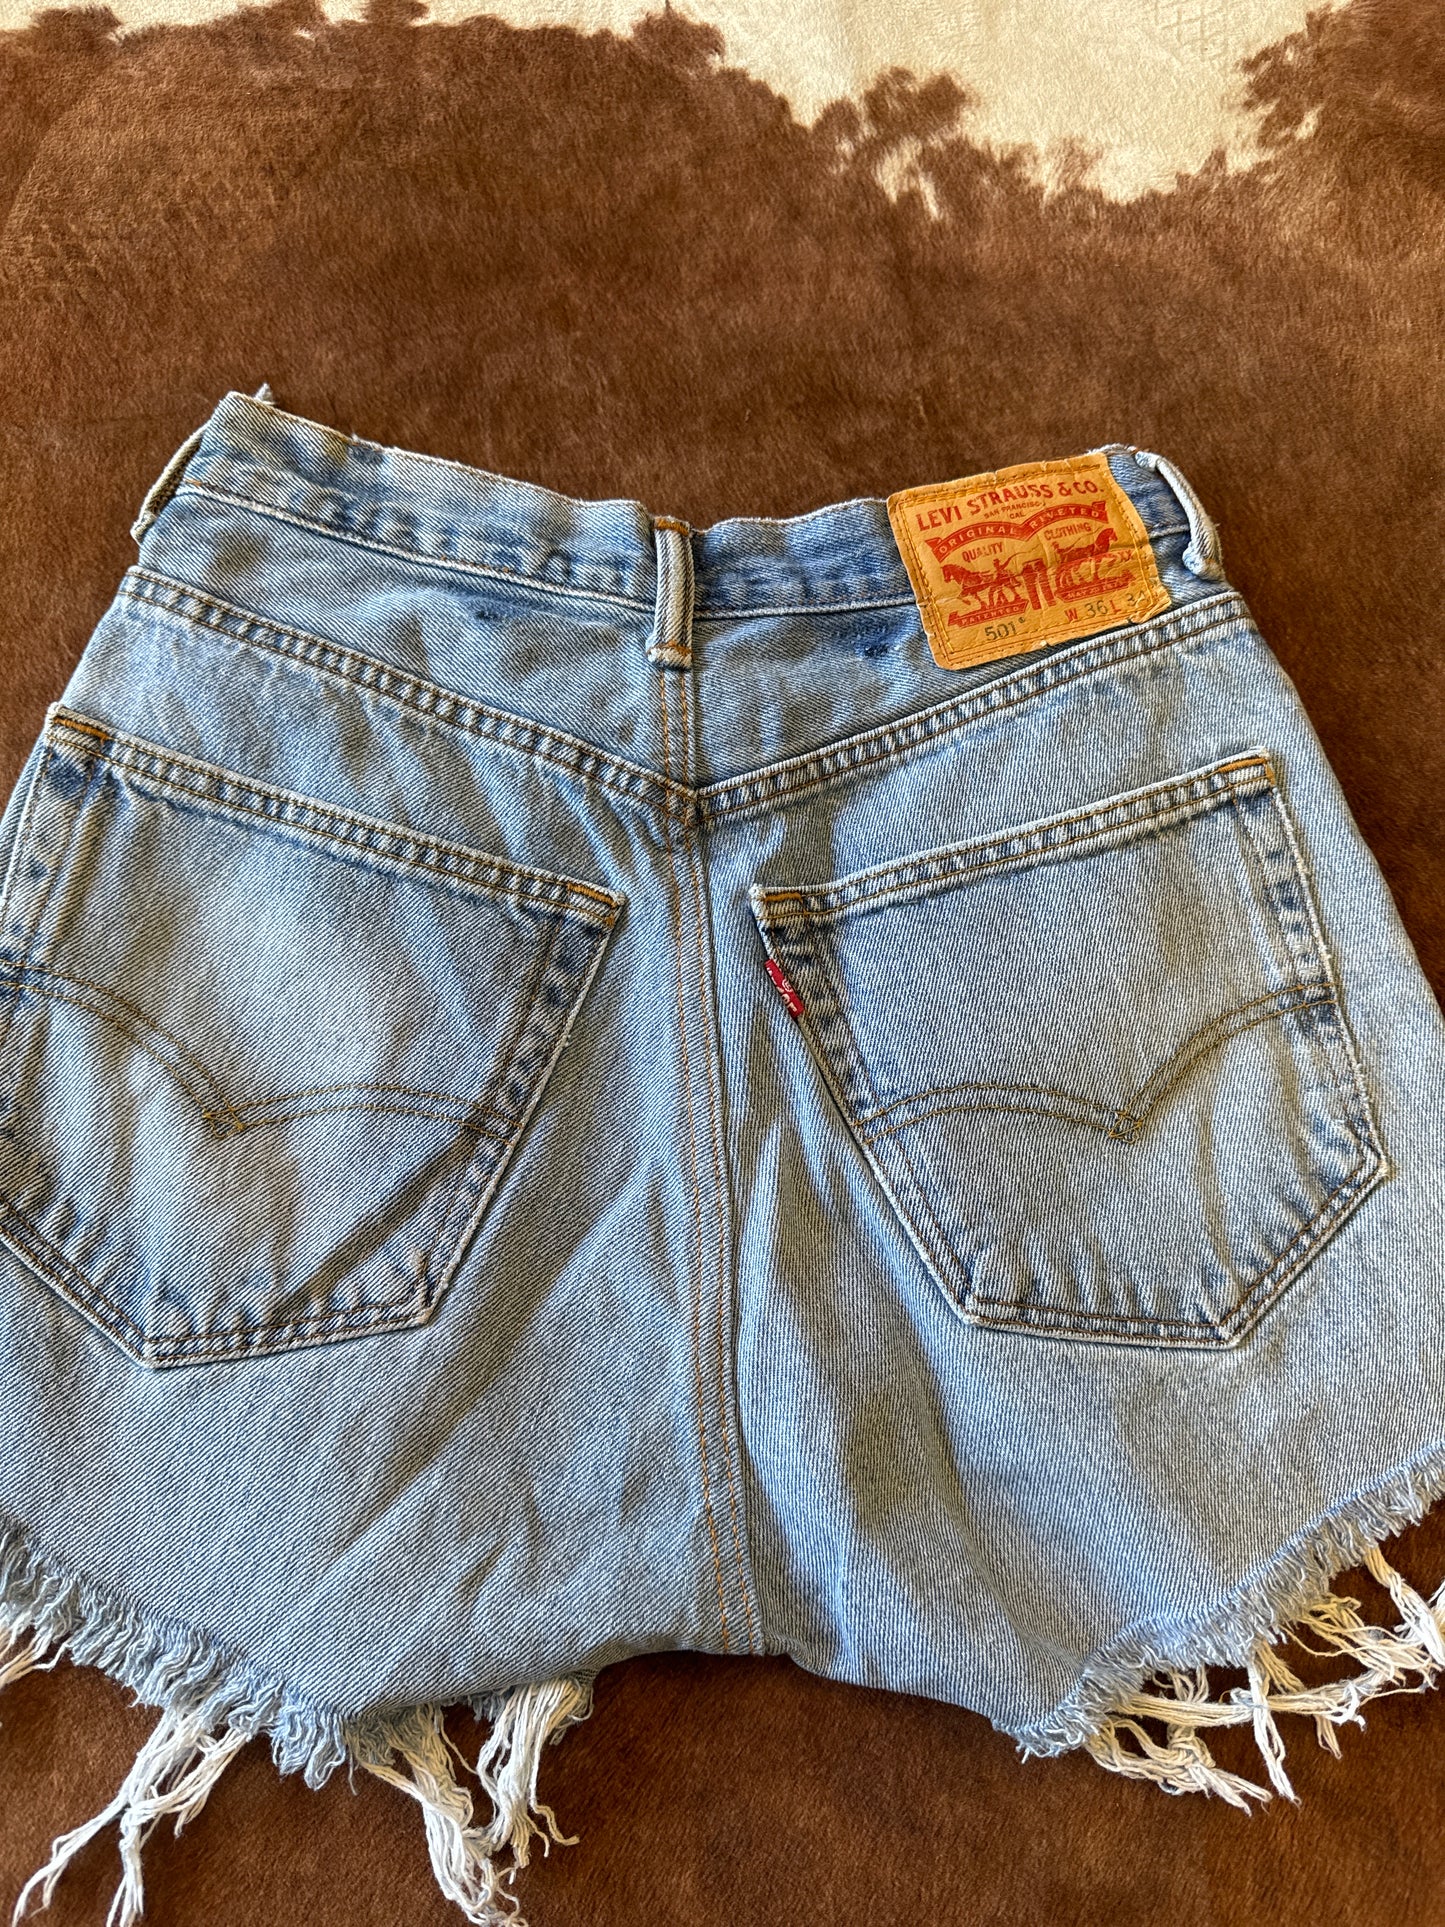 Reworked 501 Levi’s size 0